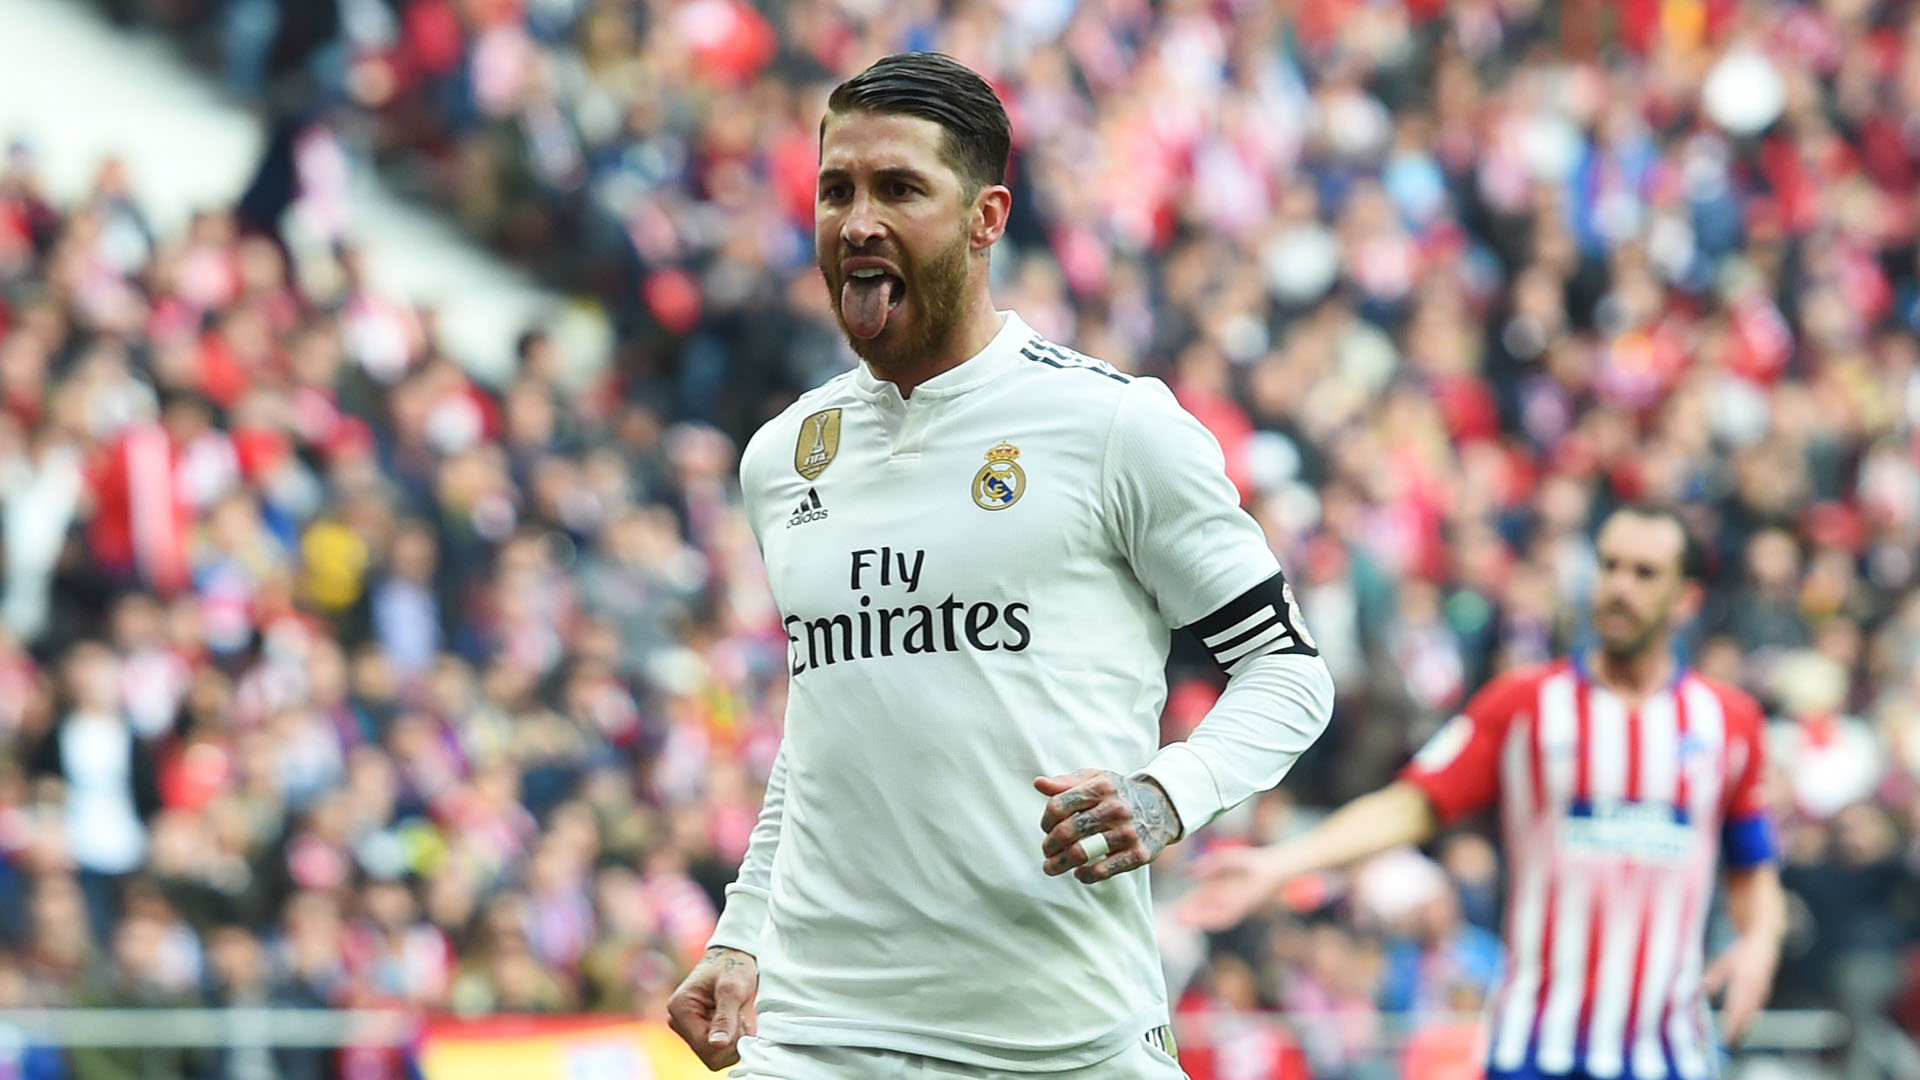 Image result for Ramos sets season scoring record in firing Real Madrid to derby victory